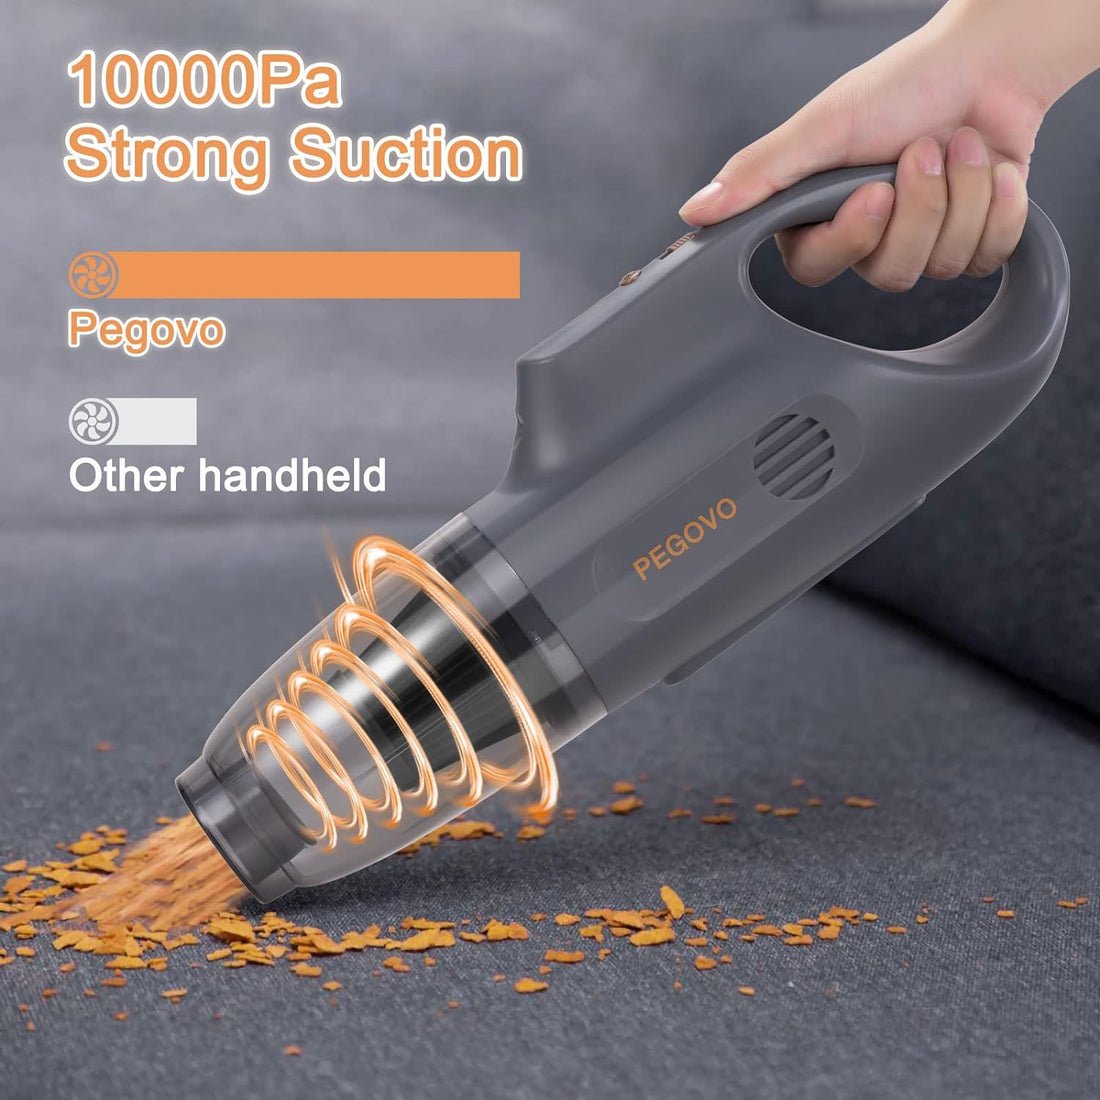 PEGOVO Hand Held Vacuuming Cordless Rechargeable-10K PA Strong Suction Car Vacuum Cordless Rechargeable,Handheld Vacuum Cordless Car Vacuum Cleaner with Pet Brush&Washable Filter